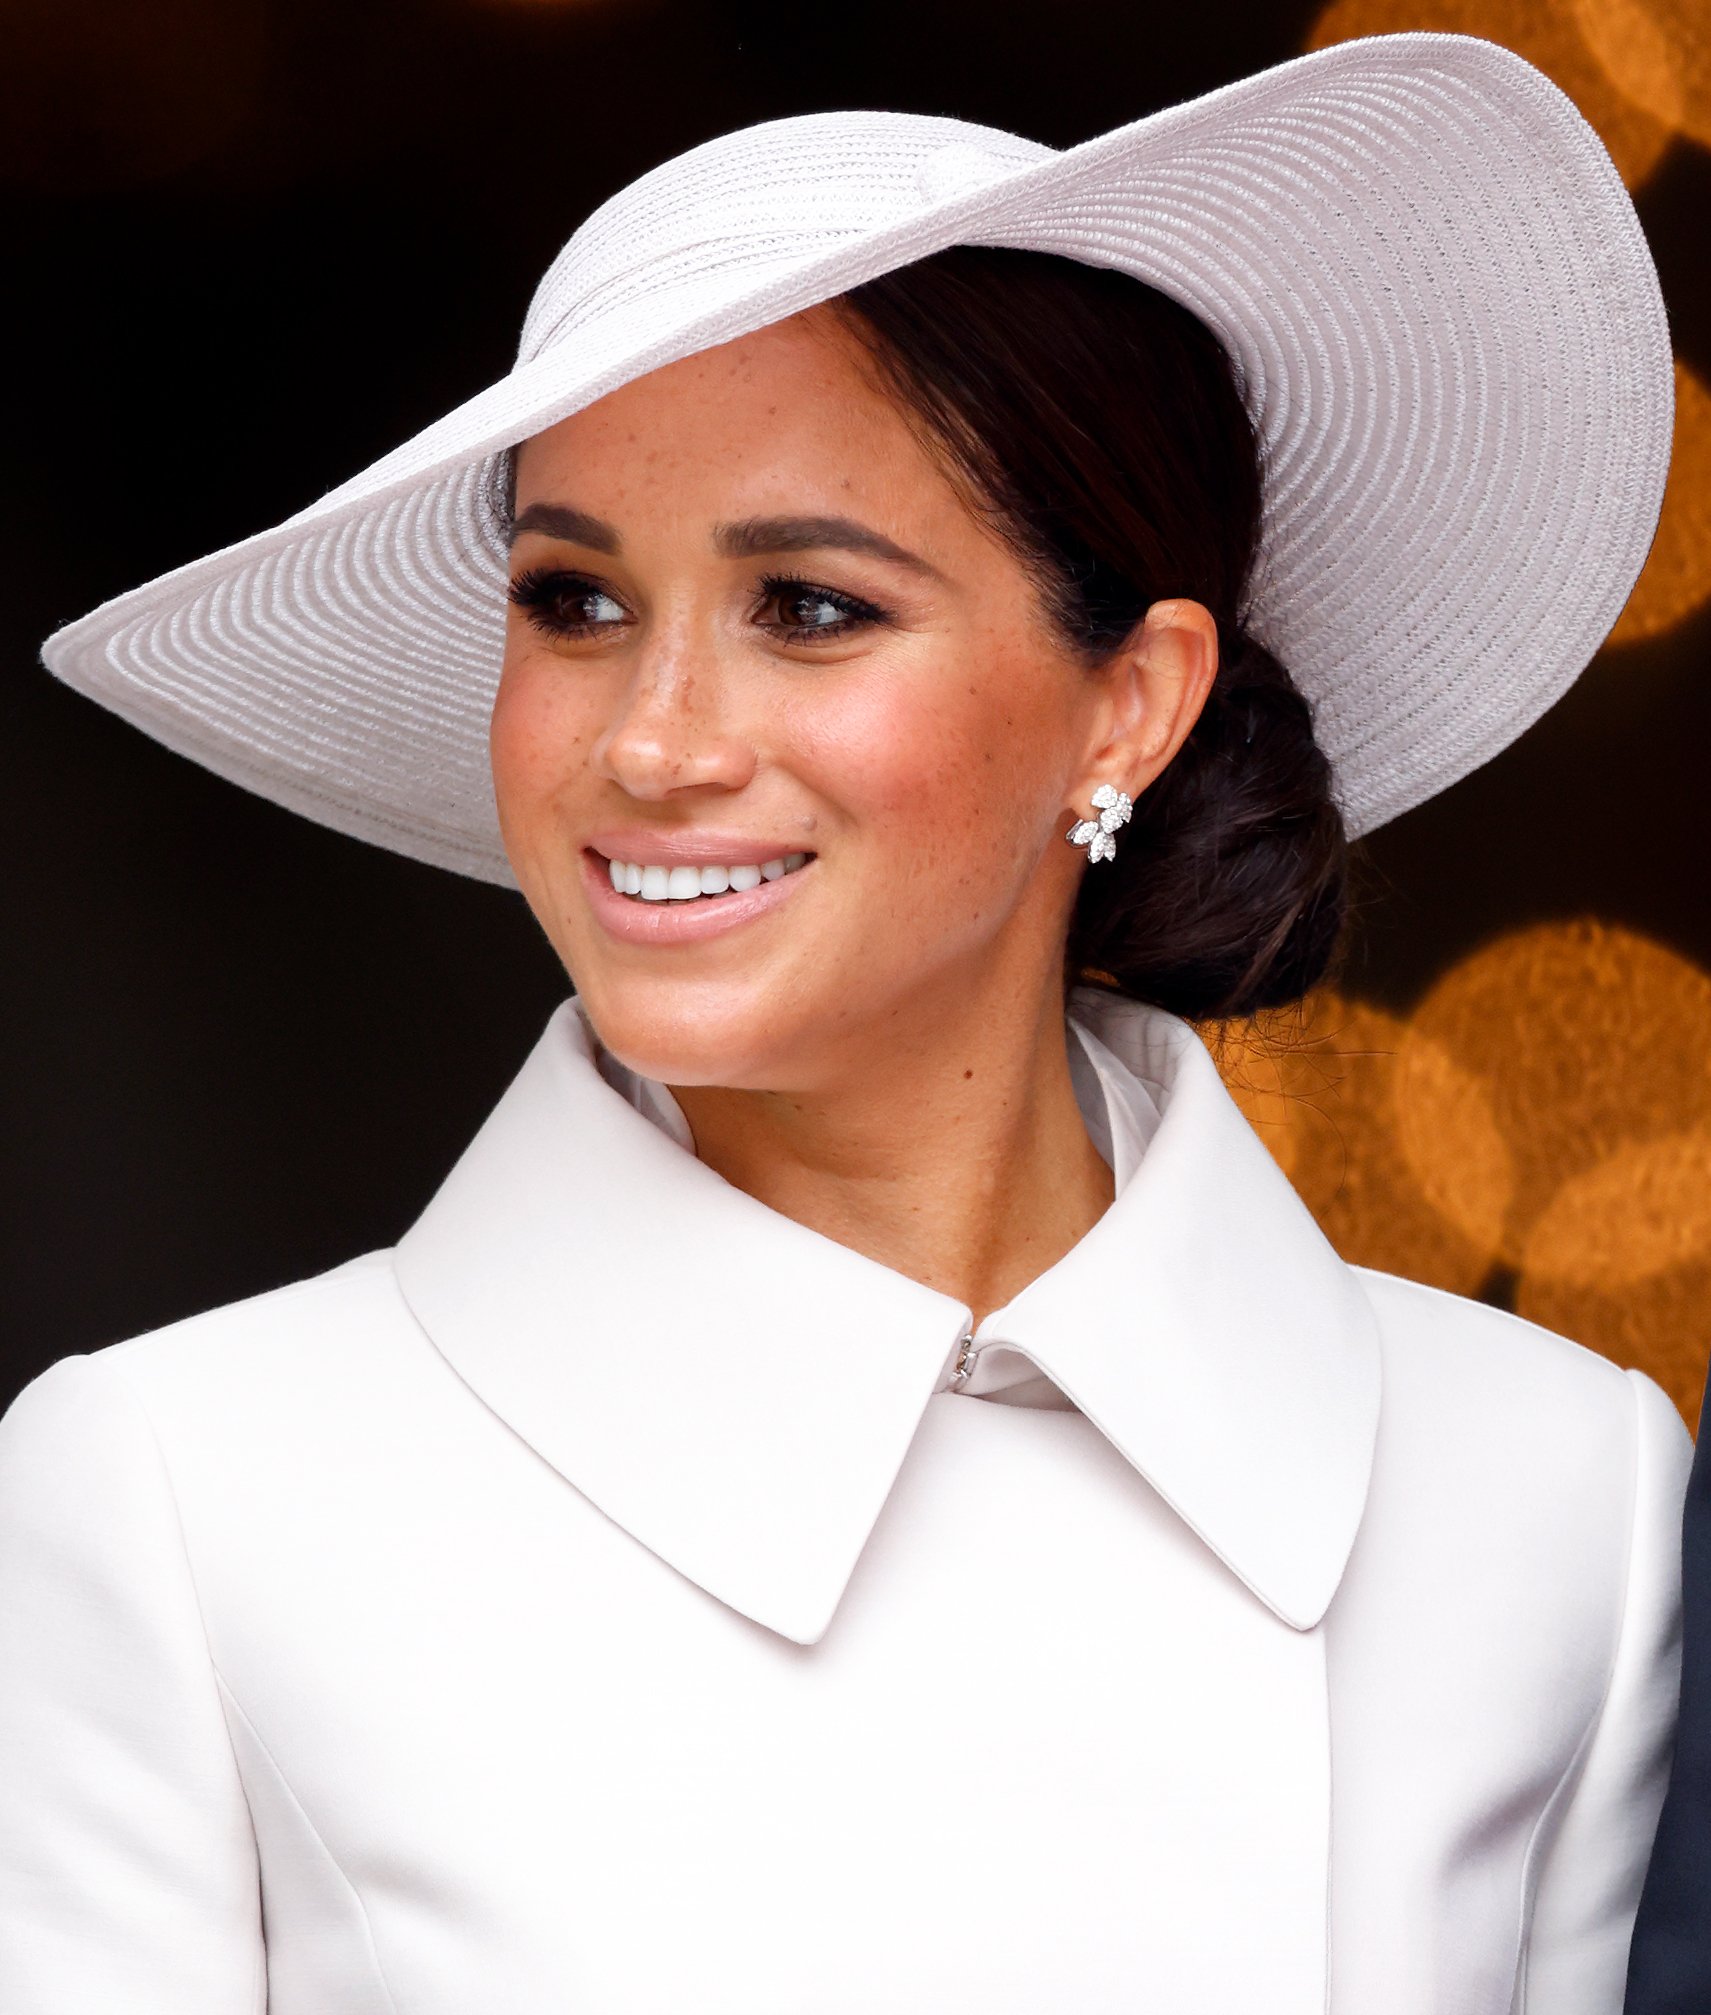 Meghan, Duchess of Sussex attends a National Service of Thanksgiving to celebrate the Platinum Jubilee of Queen Elizabeth II at St Paul's Cathedral on June 3, 2022 in London, England. | Source: Getty Images